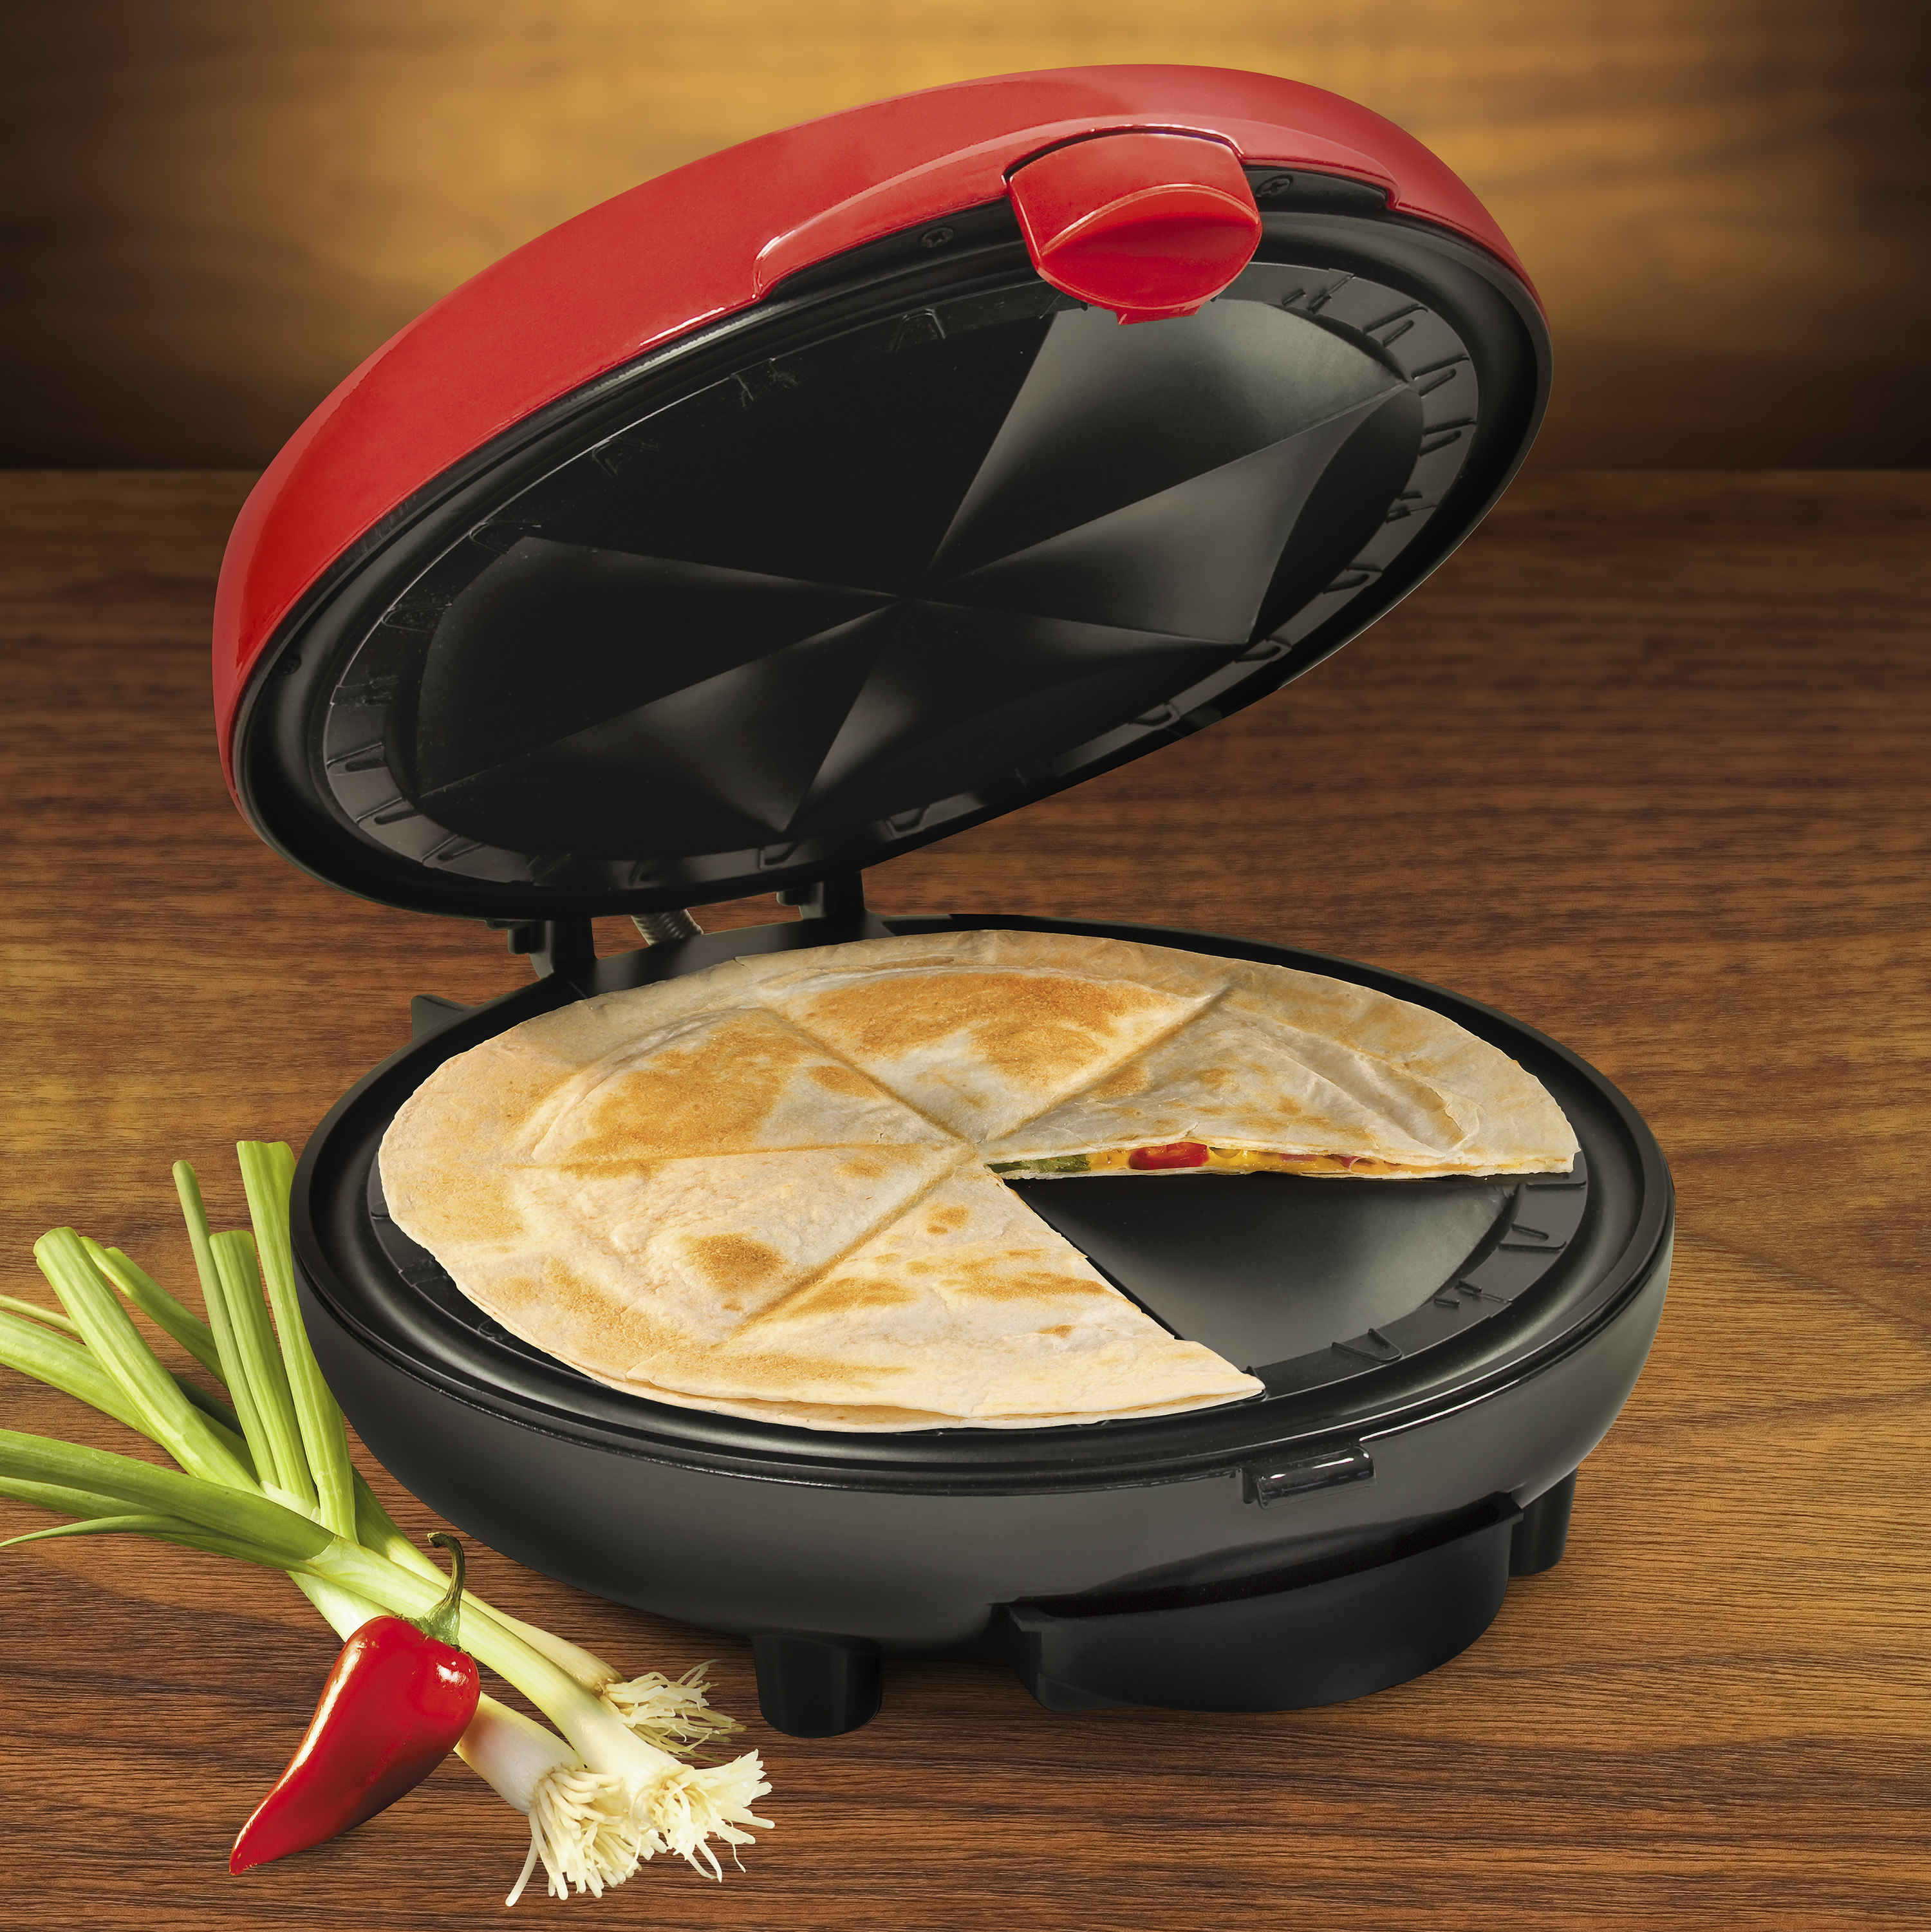 Crofton Deluxe 10-Inch 6-Wedge Electric Quesadilla Maker with Latch